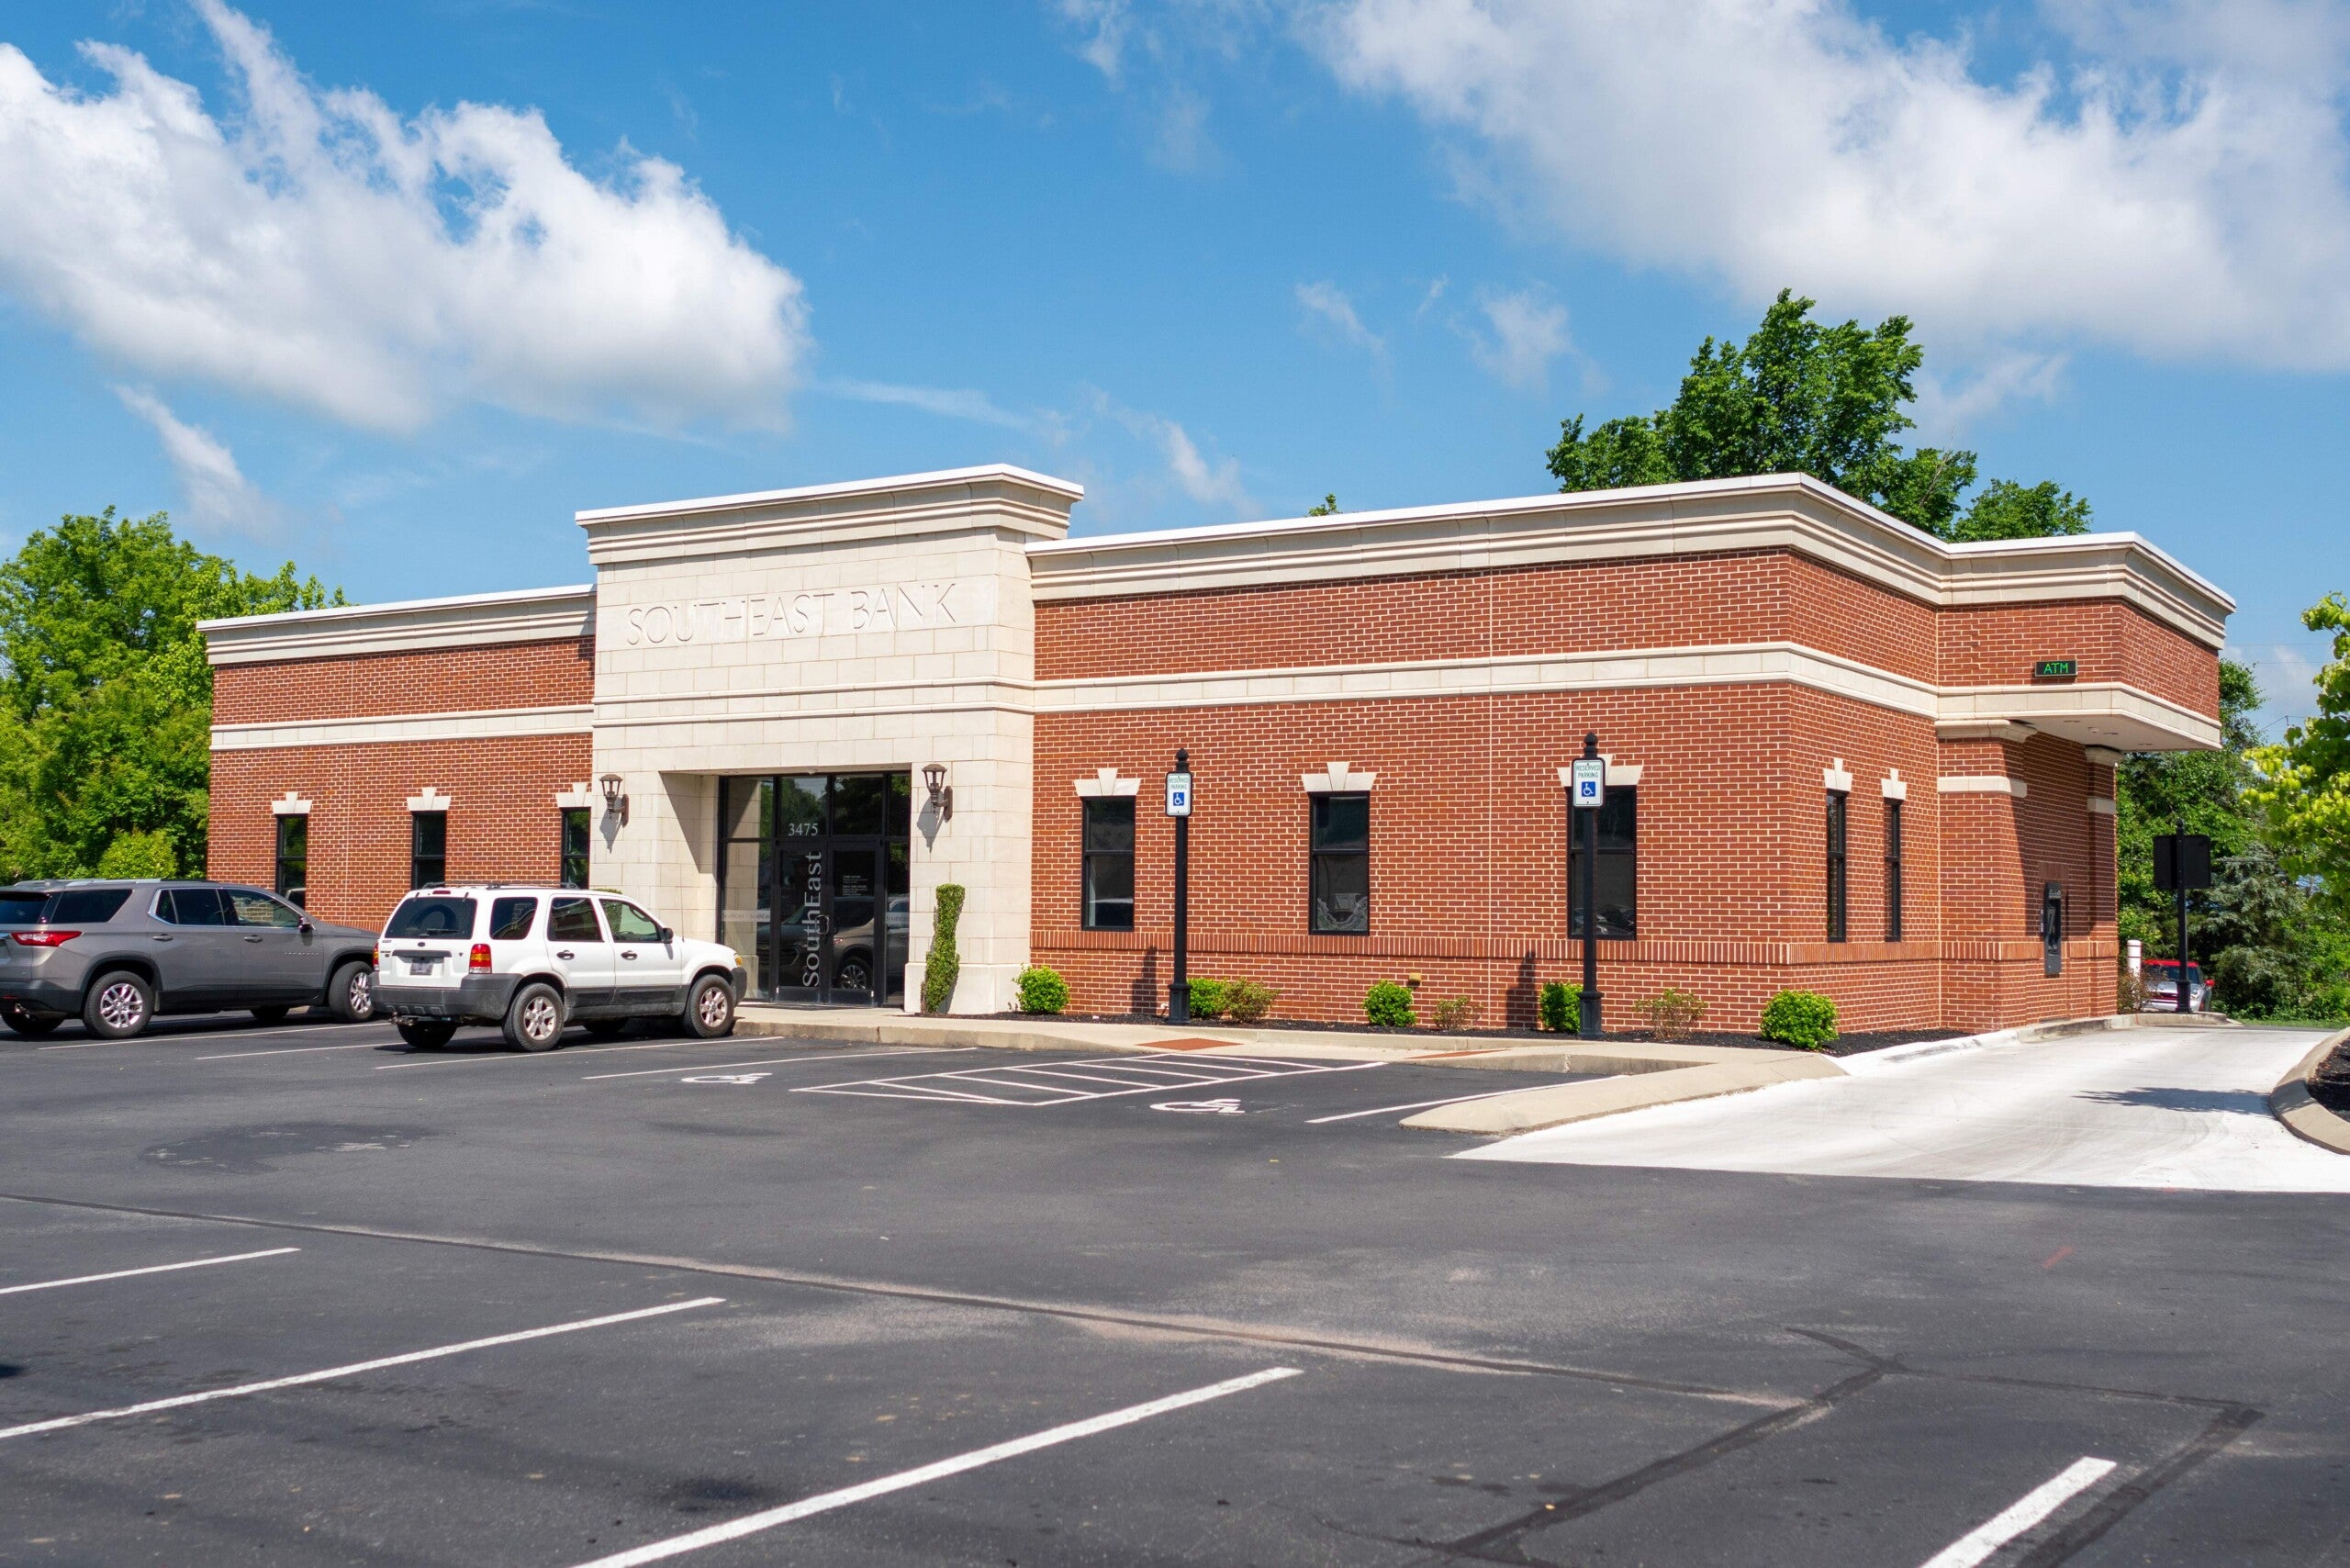 cleveland tennessee southeast bank branch photo